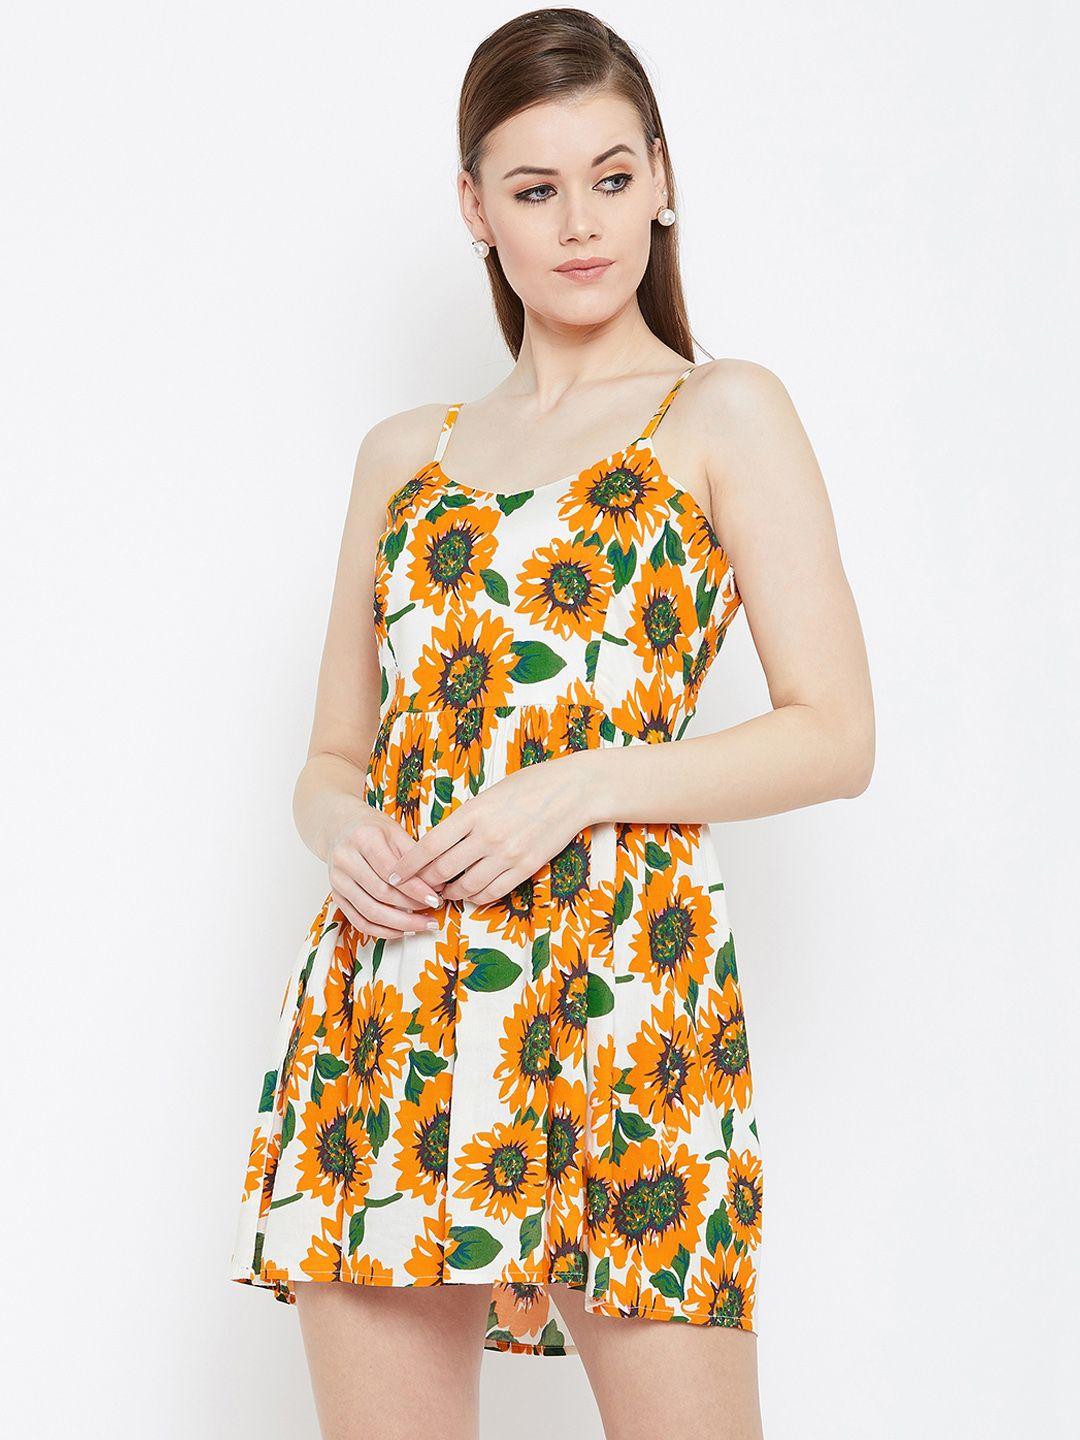 berrylush women yellow & white floral print fit and flare dress